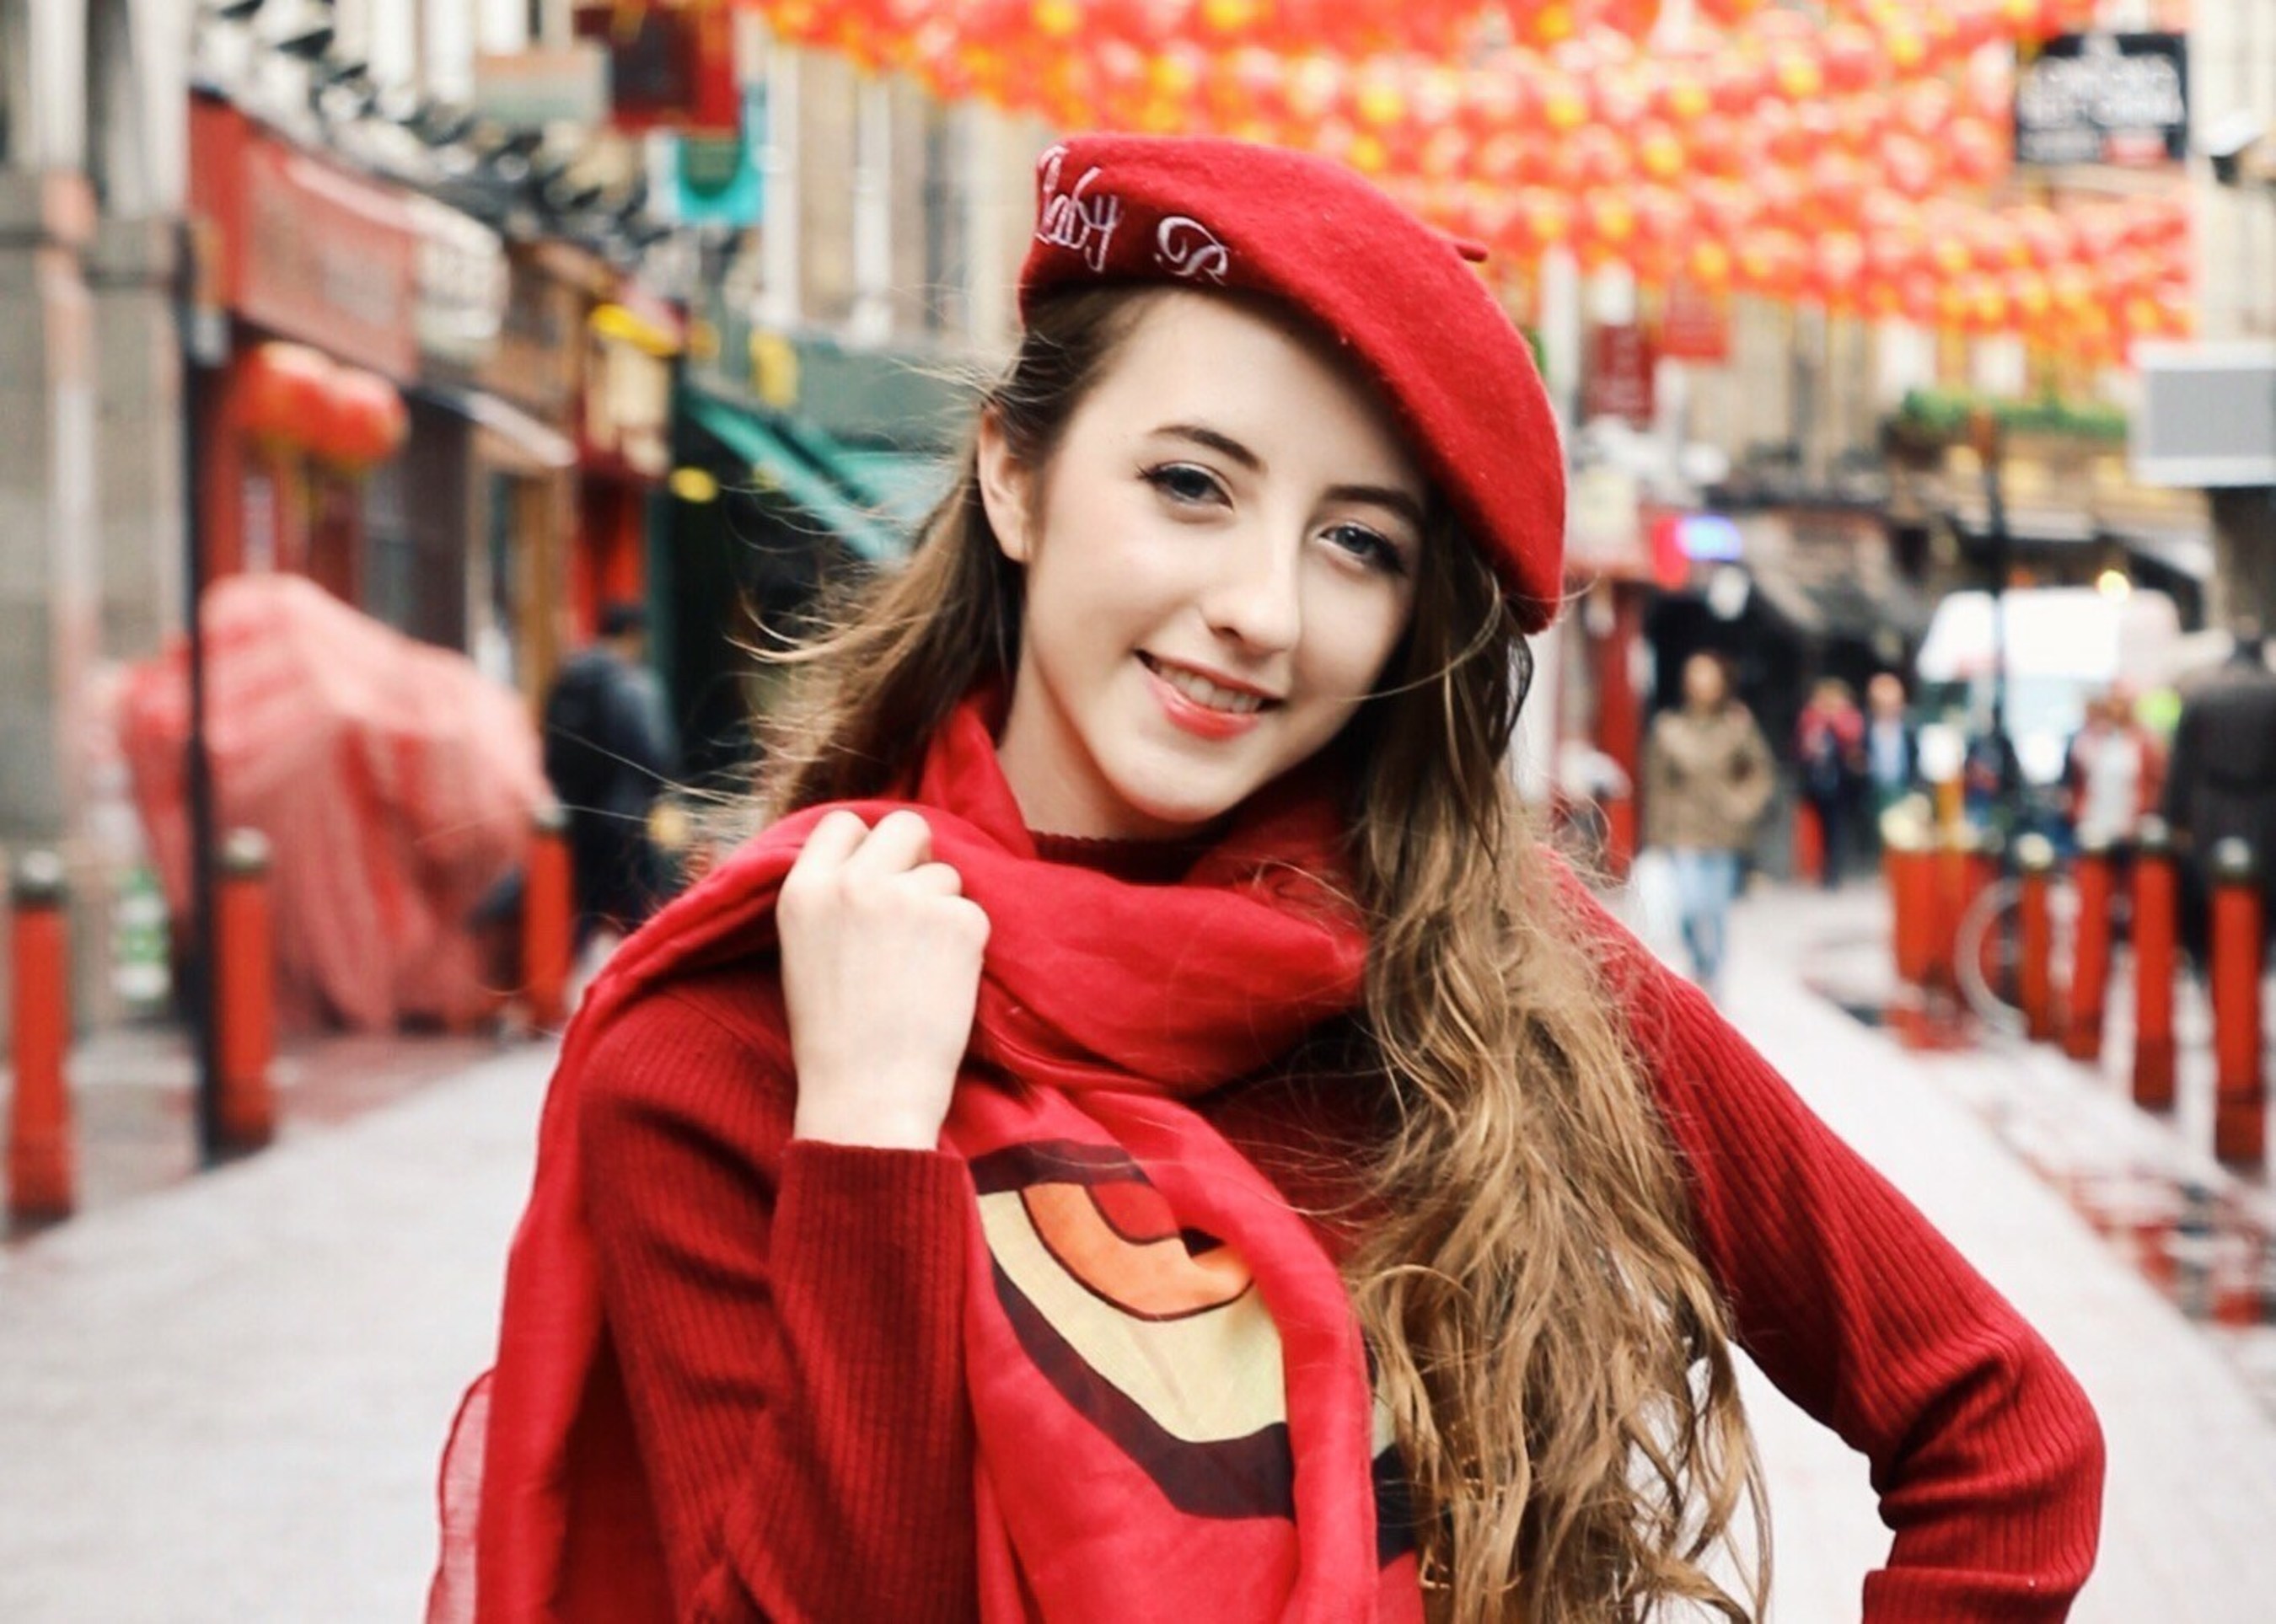 Model and singer Beckii Cruel tries out the official Senketsu "eye" scarf, exclusive to the OMAKASE launch box.